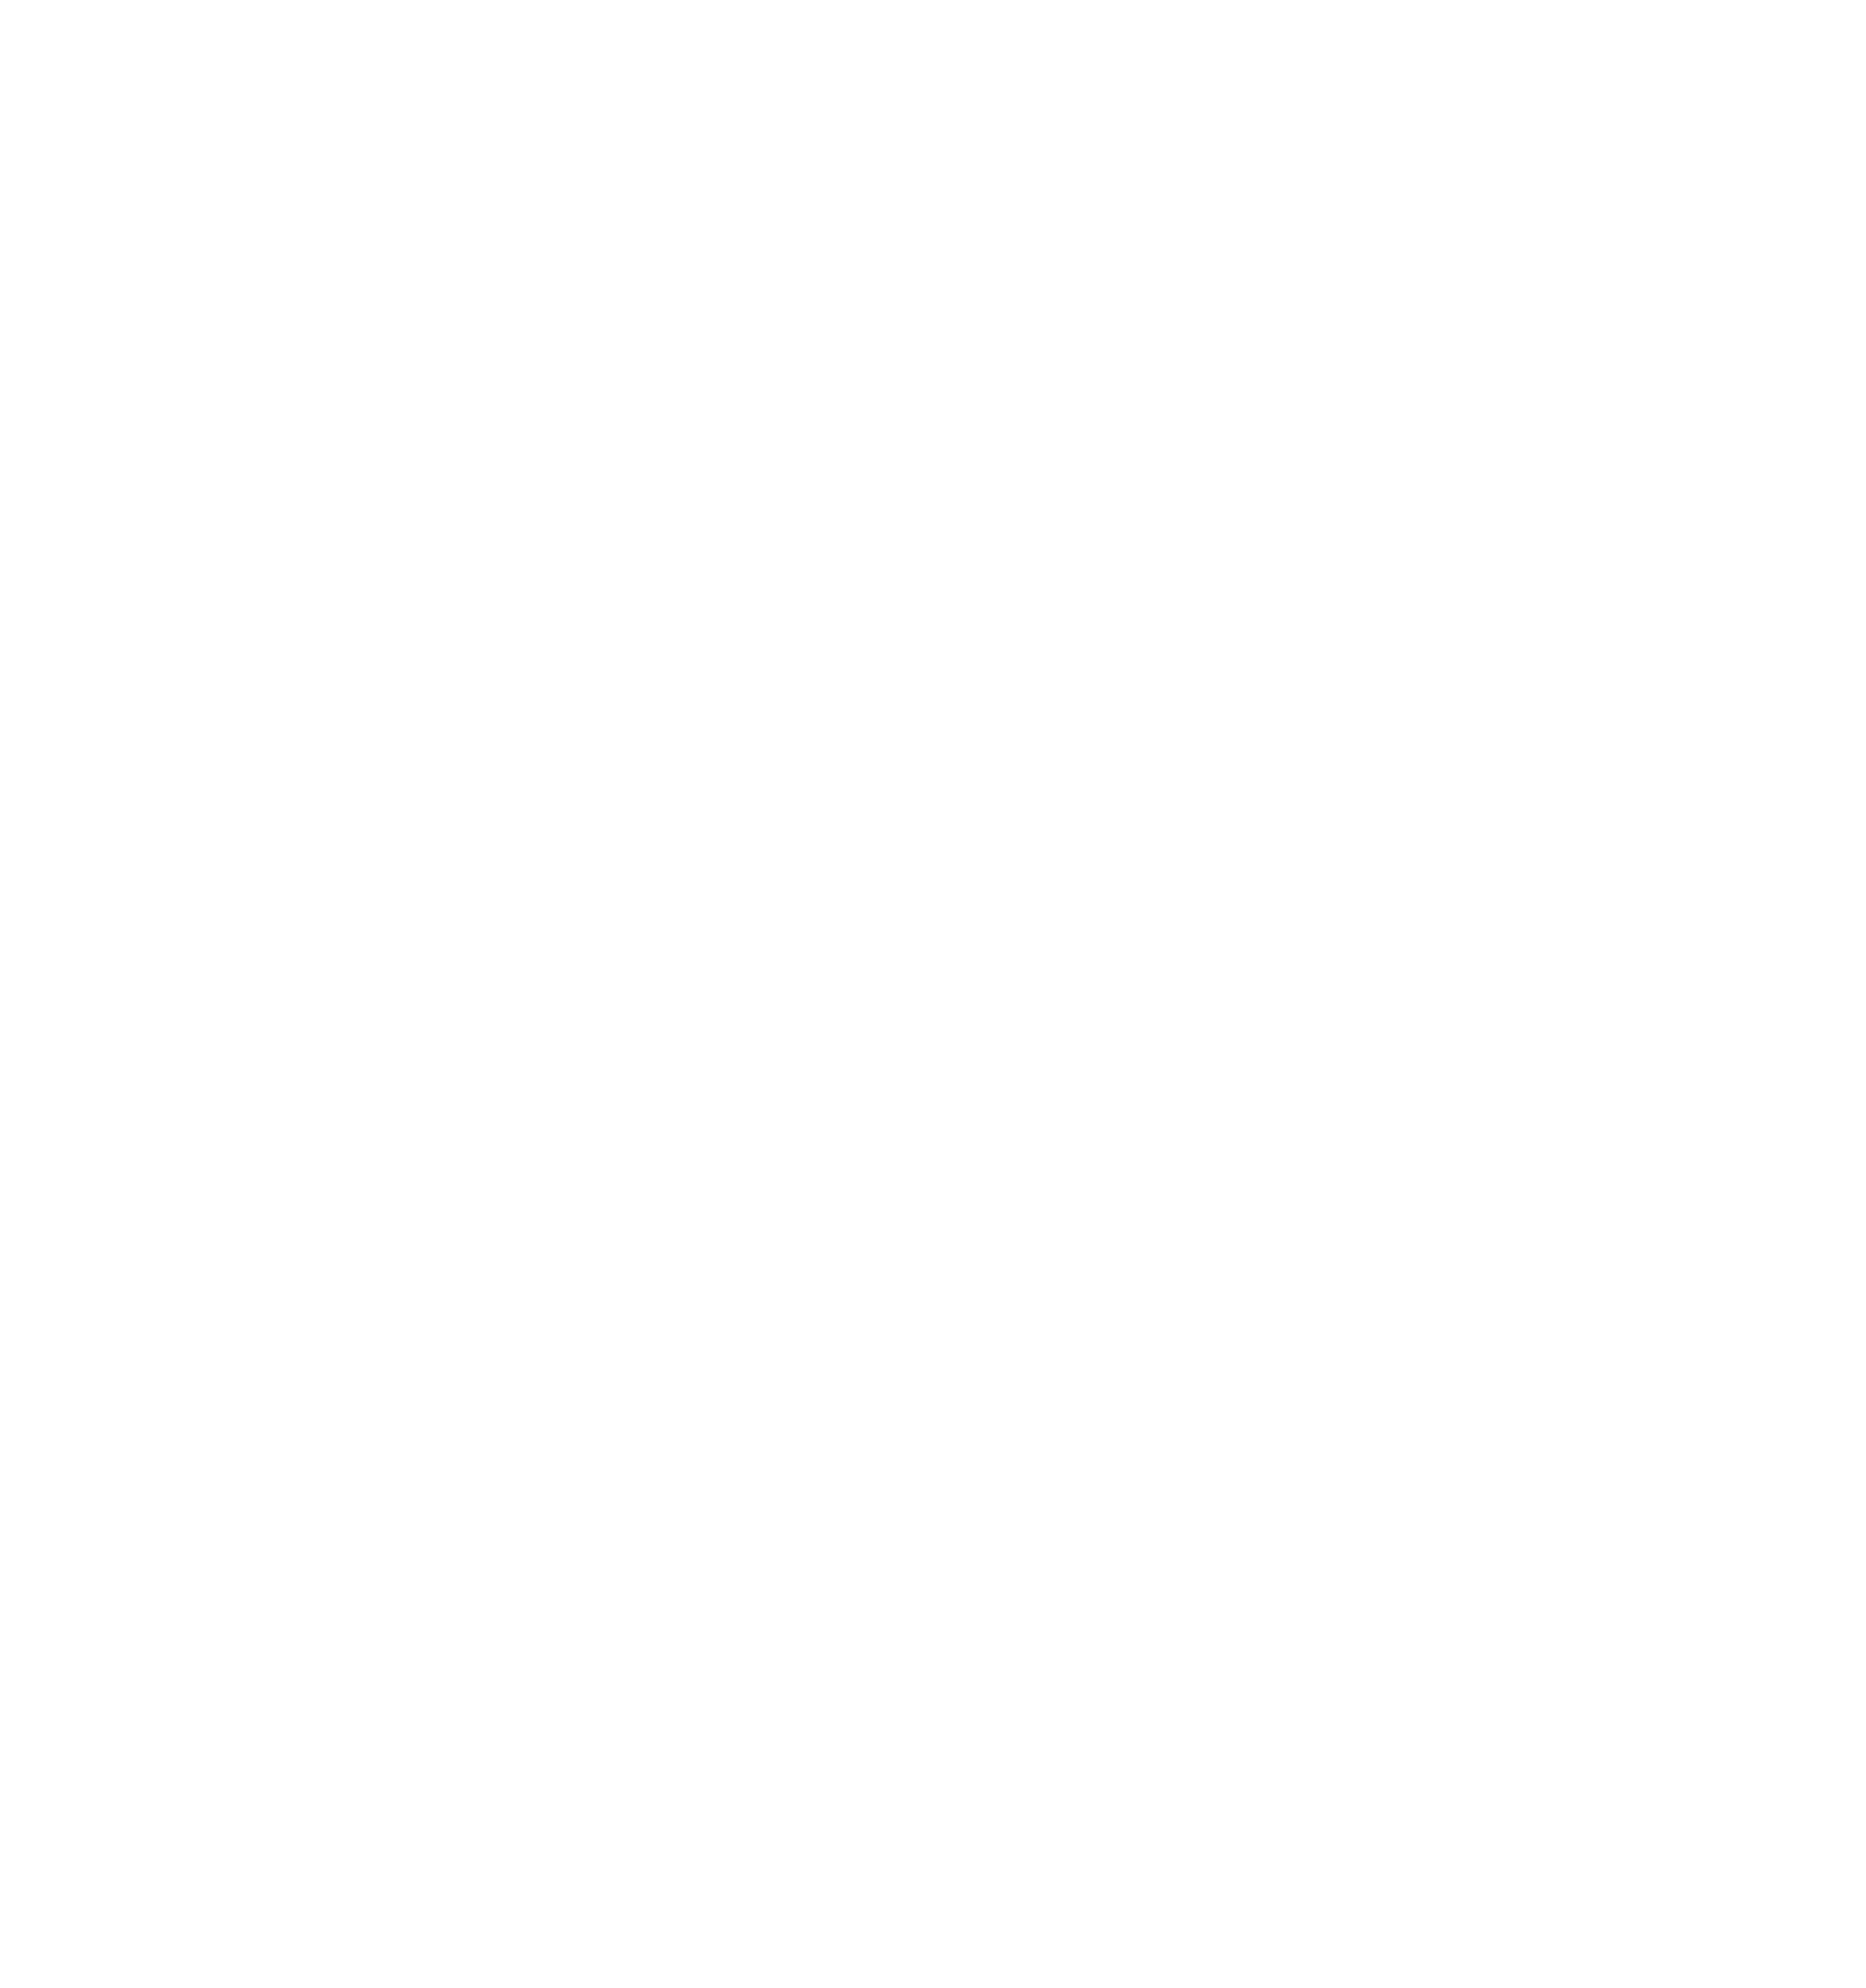 Mittagong Physio - Premium healthcare in the highlands.